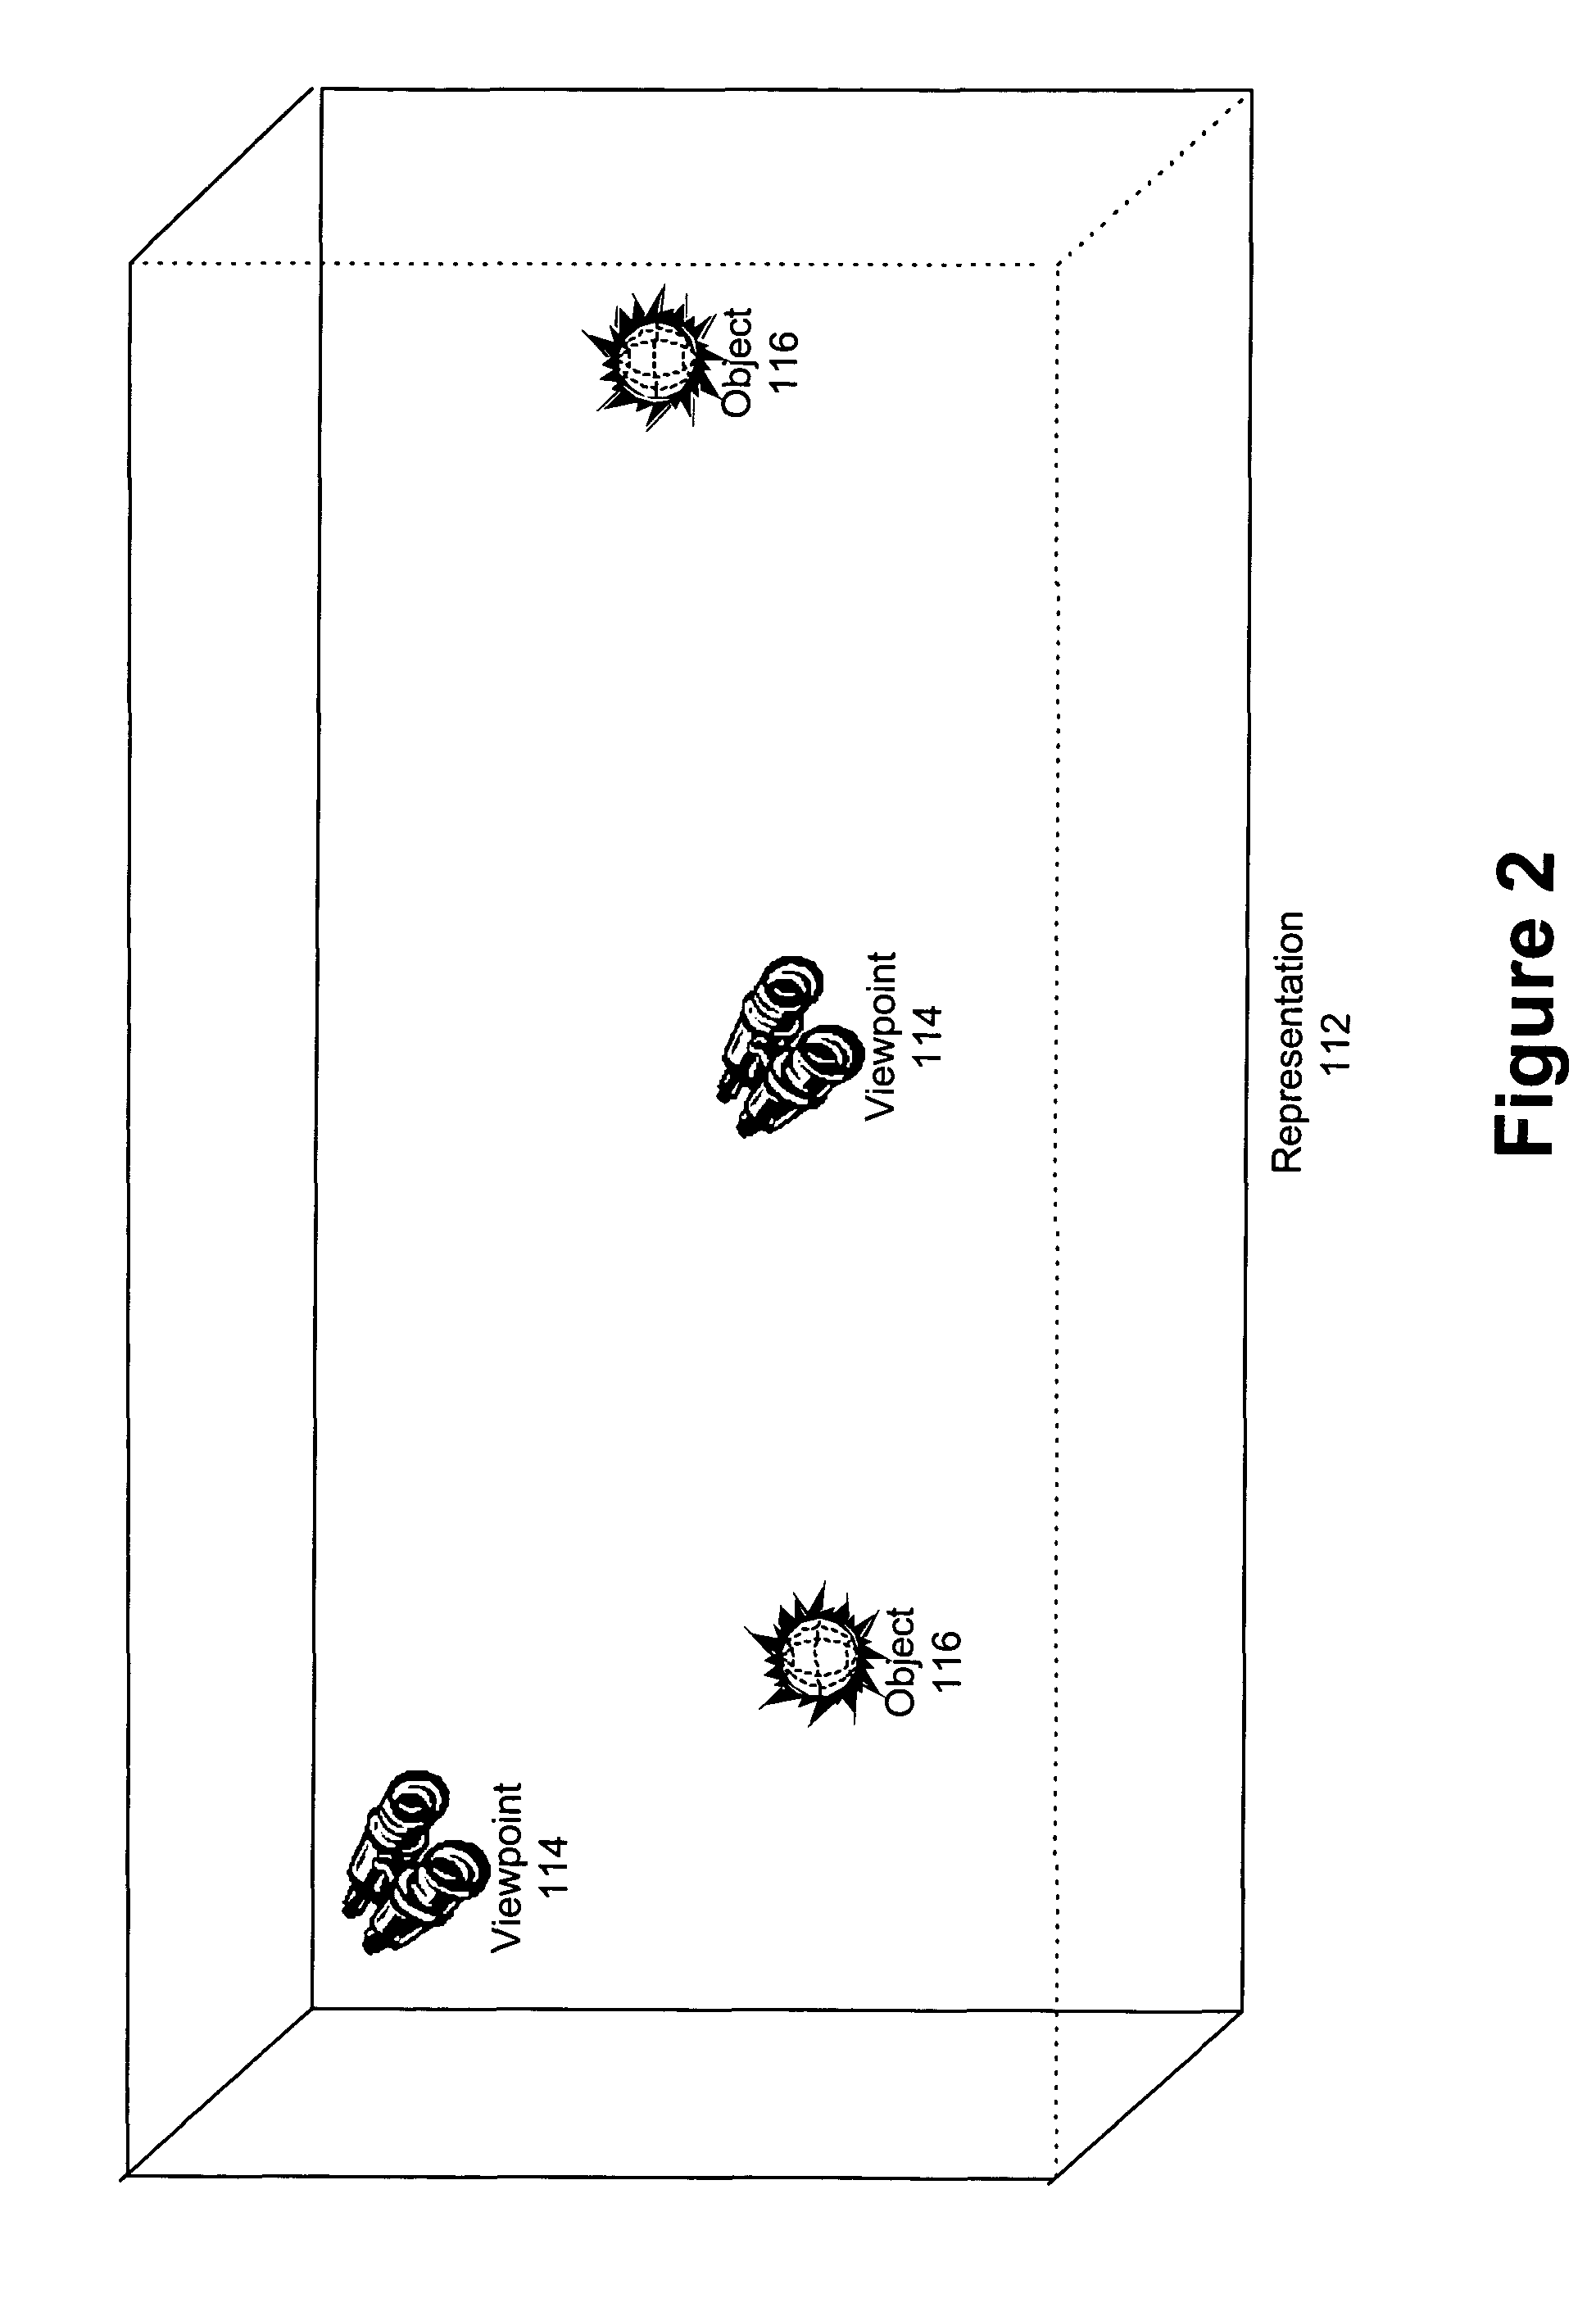 System or method for interacting with a representation of physical space